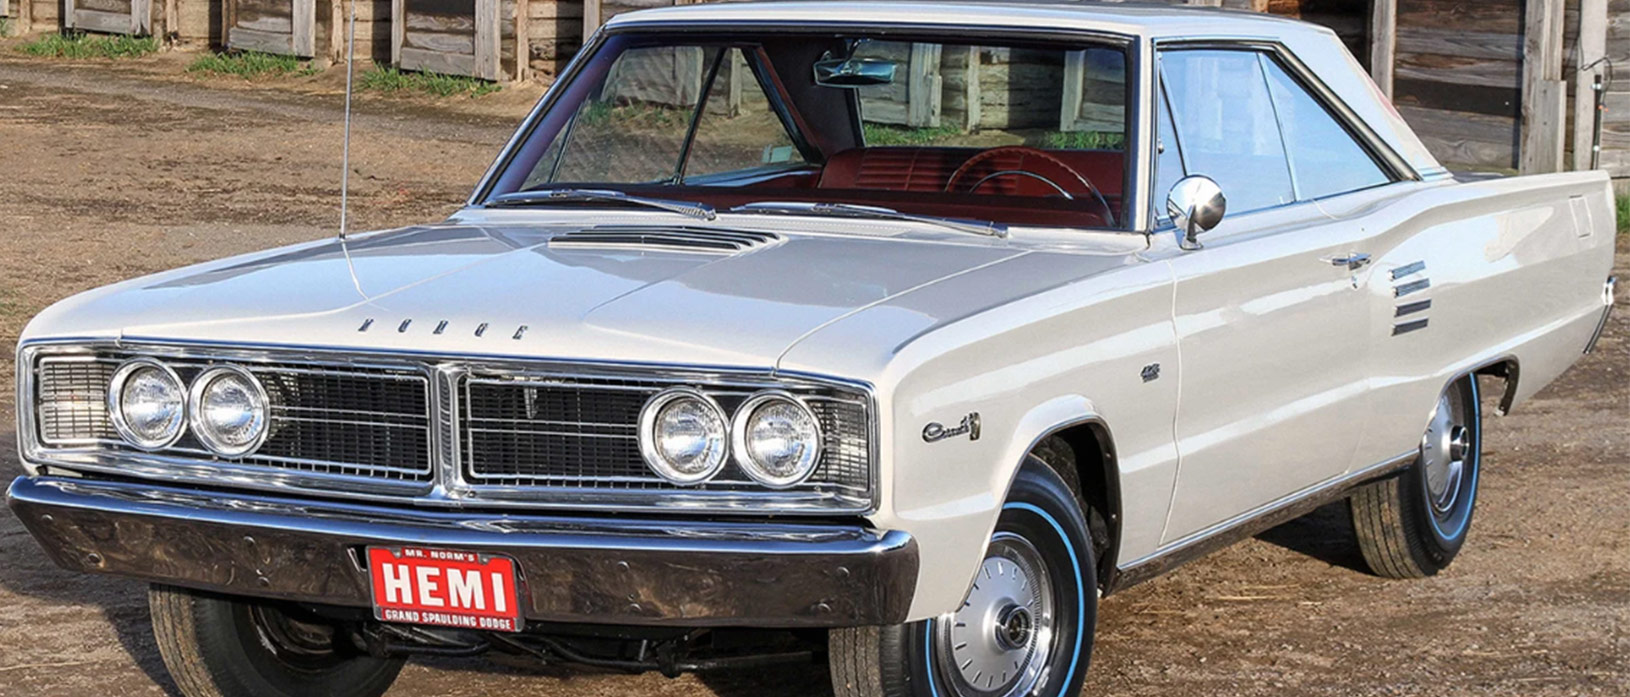 Dodge Coronet: We Bet You Didn’t Know This